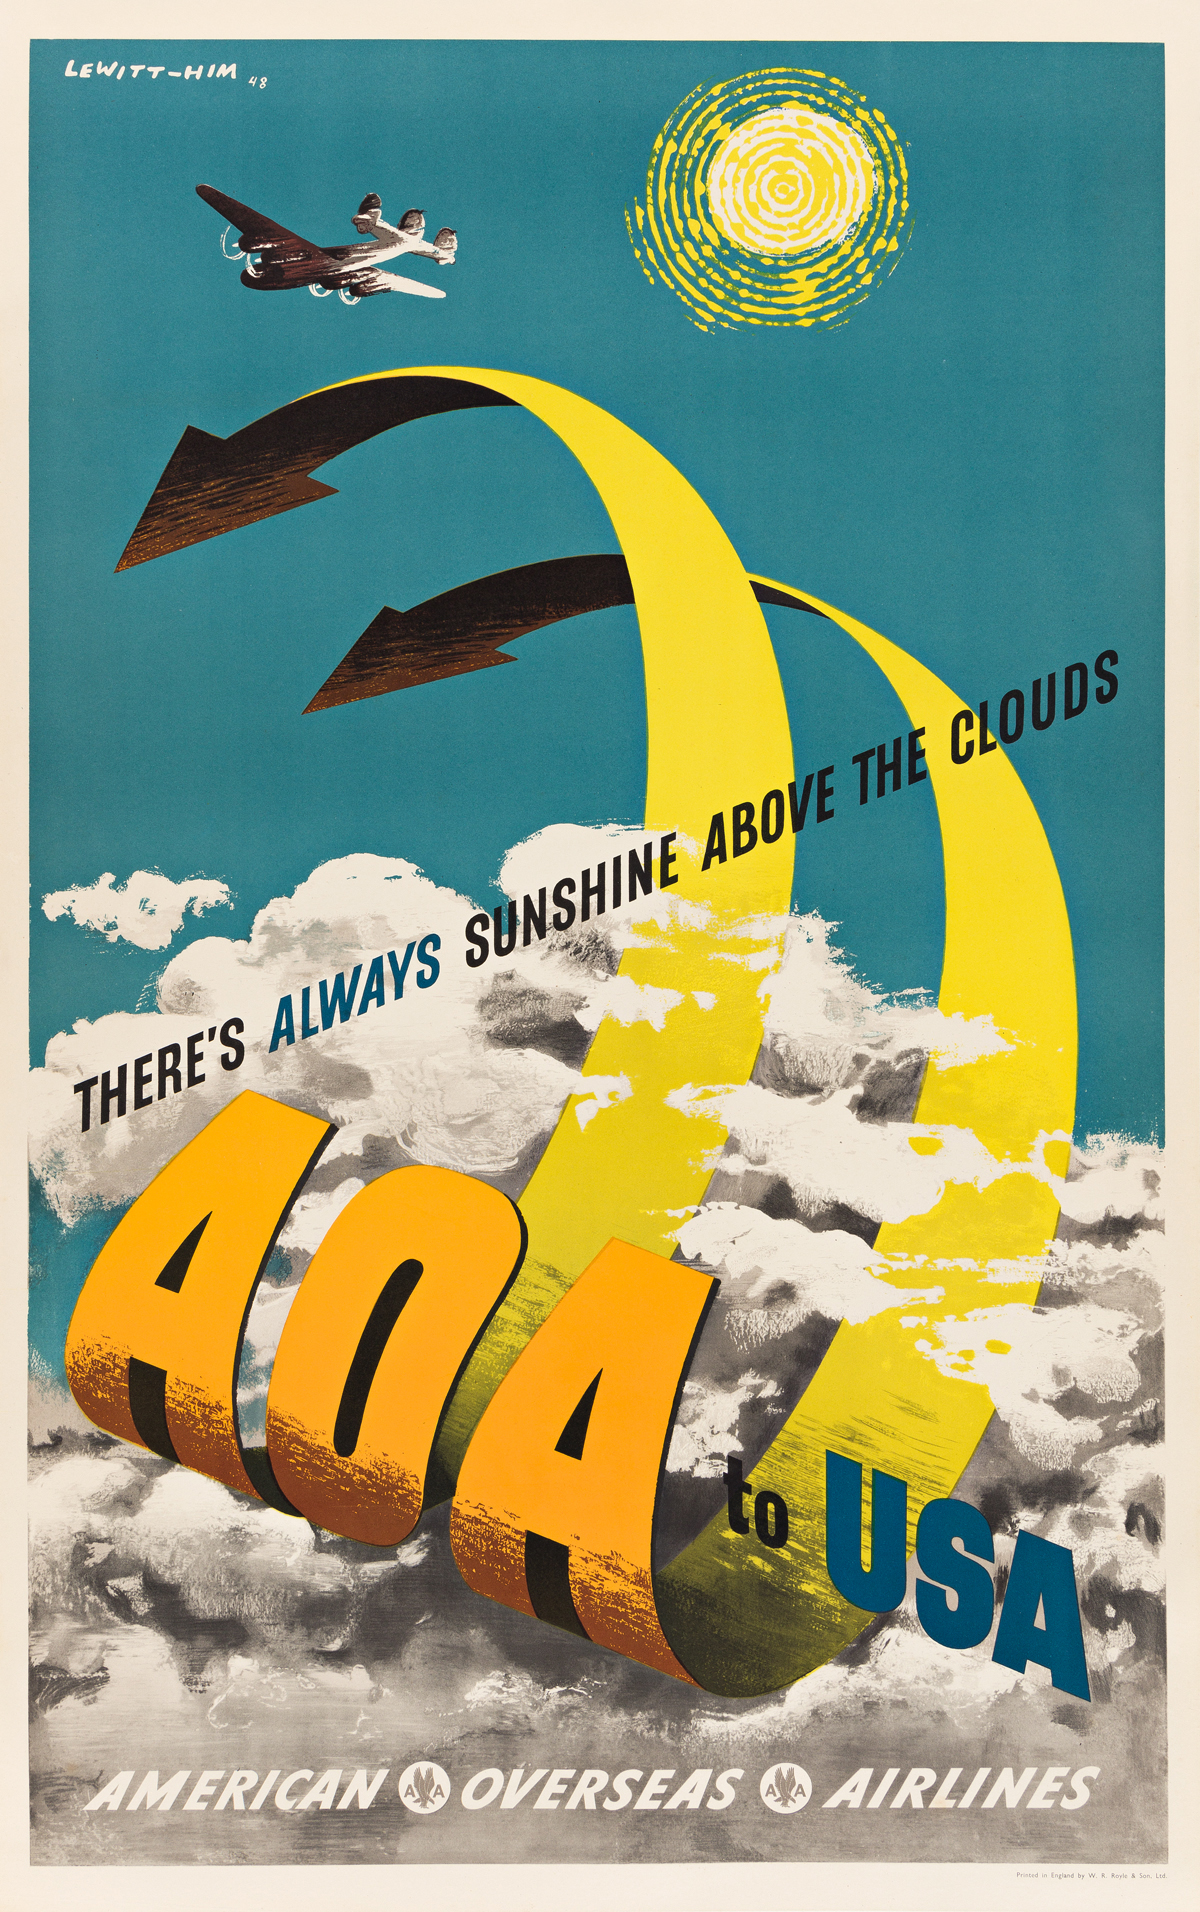 LEWITT-HIM (JAN LEWITT, 1907-1991 & JERZY HIM, 1900-1981).  AOA TO USA / AMERICAN OVERSEAS AIRLINES. 1948. 38x24 inches, 96½x63½ cm. W.